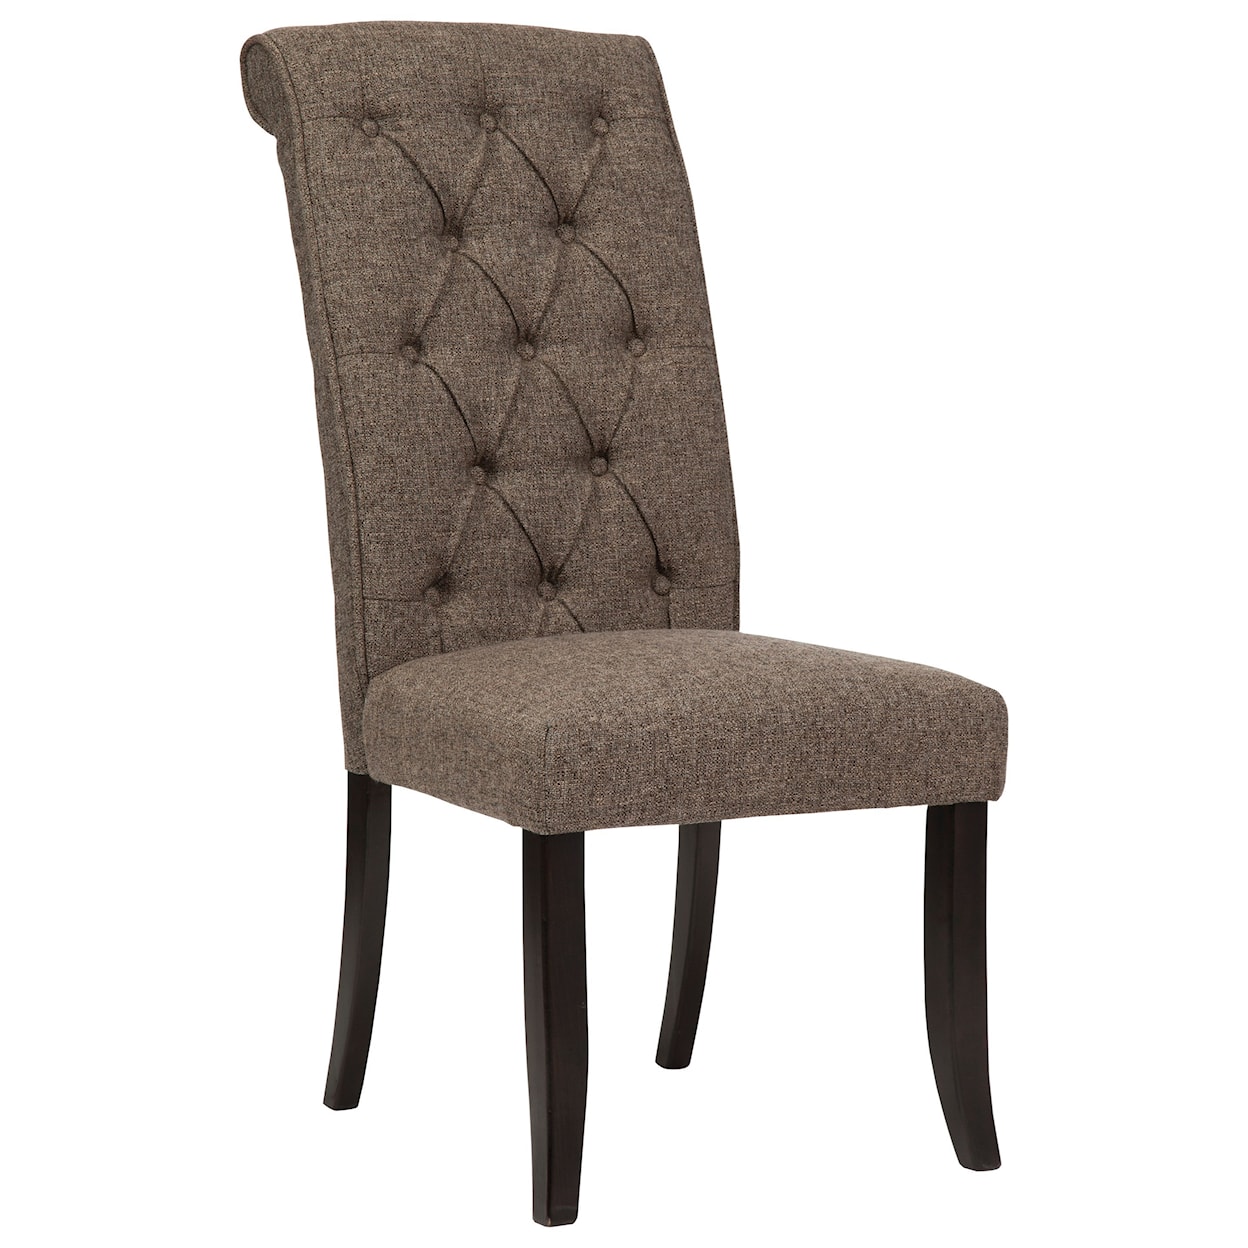 Michael Alan Select Tripton Dining Upholstered Side Chair